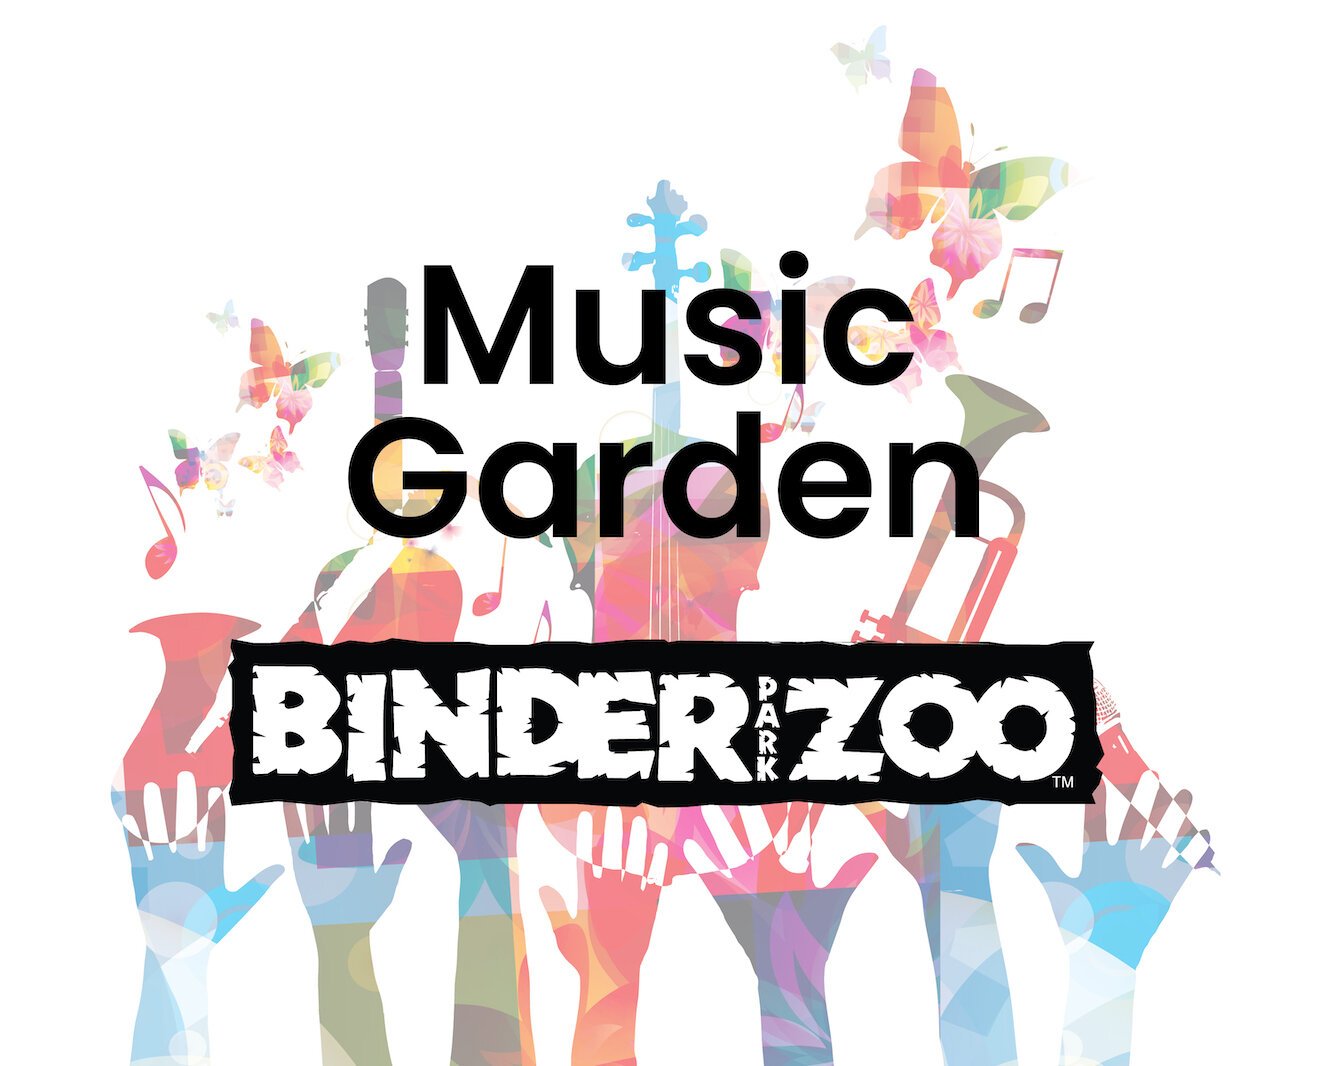 Music Garden is a new offering this year at Binder Park Zoo.